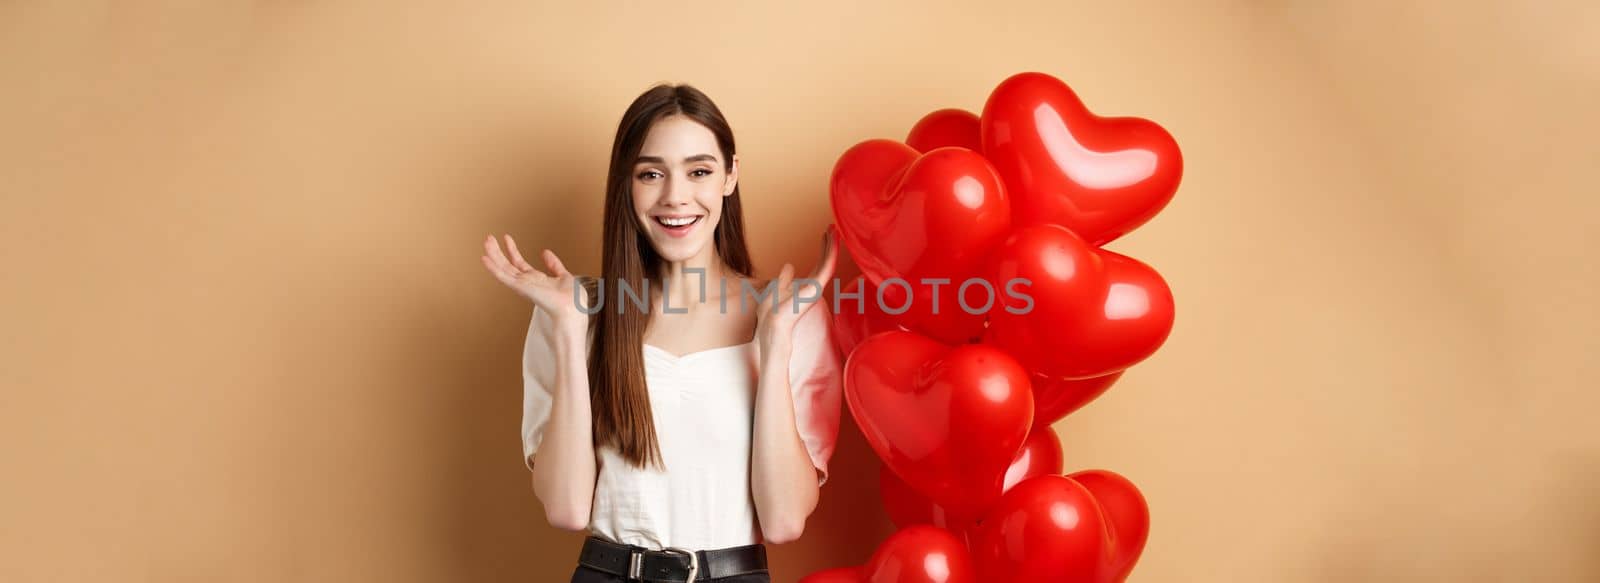 Valentines day and love concept. Happy smiling woman raising hands up surprised, standing near romantic heart balloons on beige background.